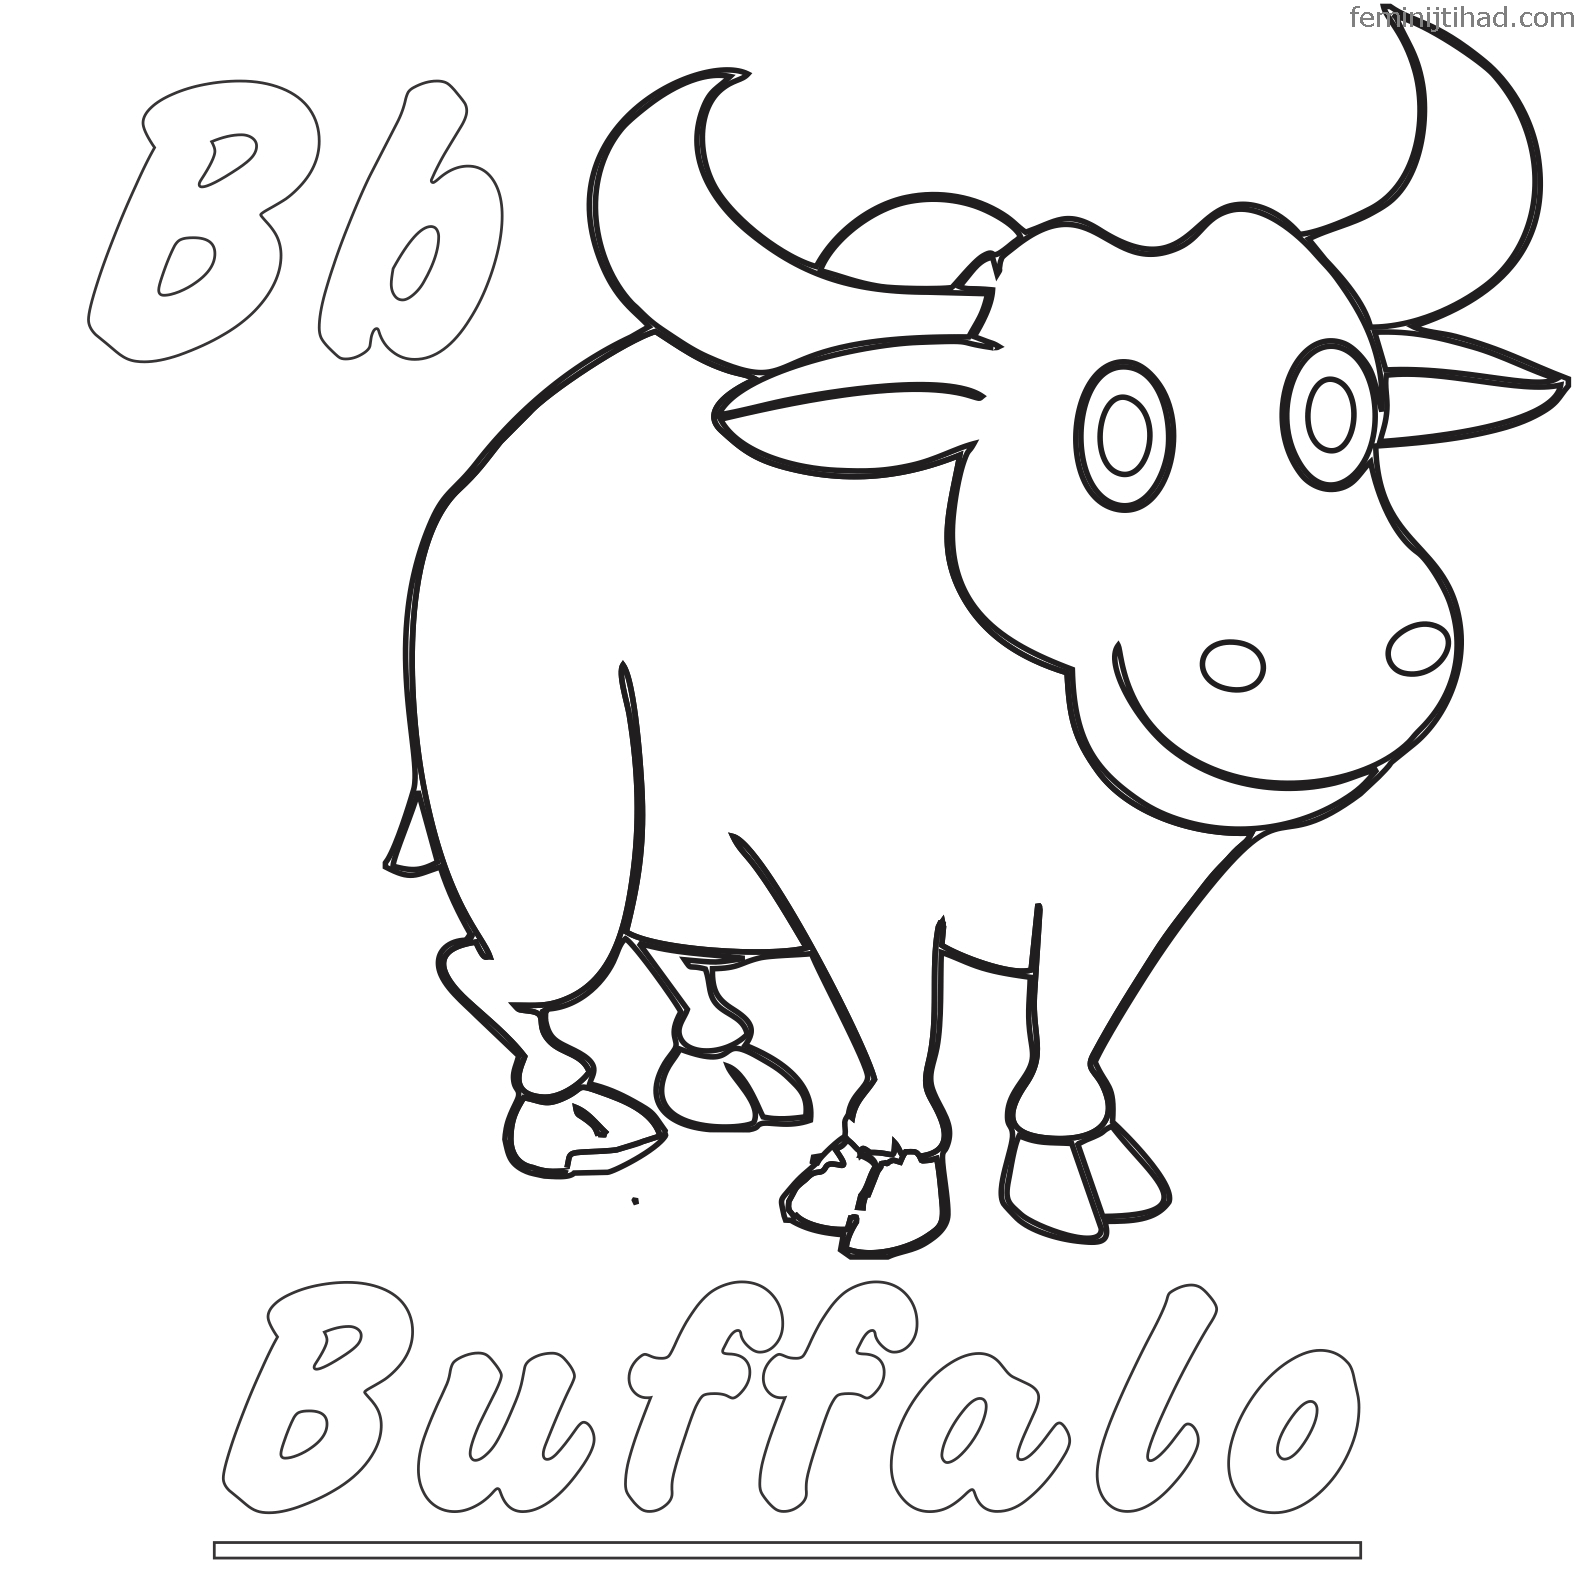 coloring page of buffalo